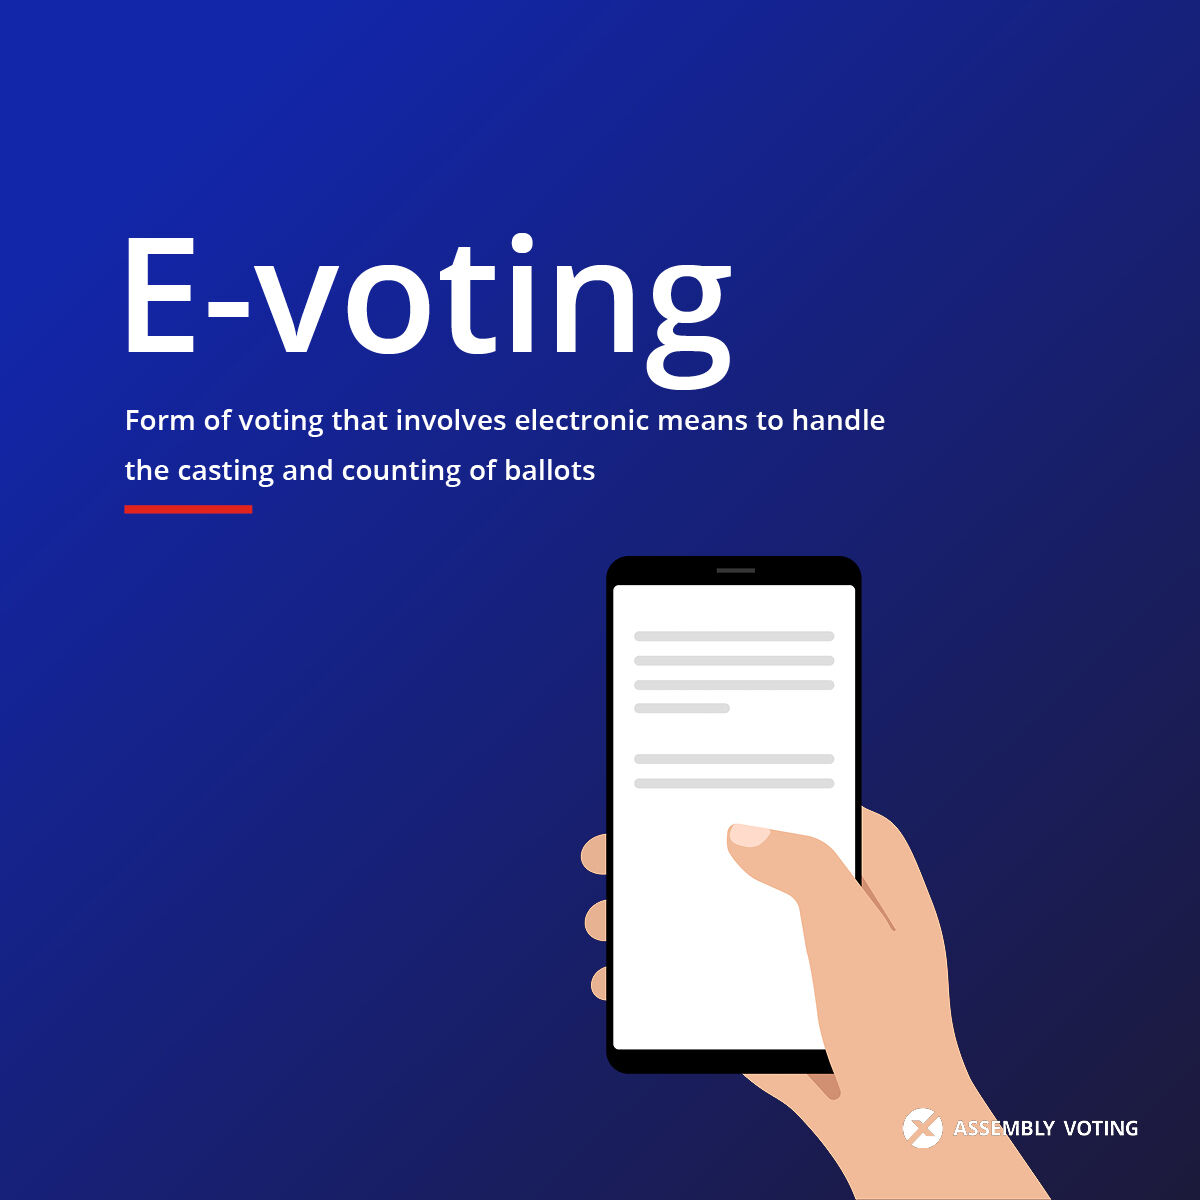 Electronic voting can improve and simplify balloting processes for those who cannot access physical polling stations. We strive to make every election accessible and secure to all voters - How can electronic voting impact voter engagement in your community?